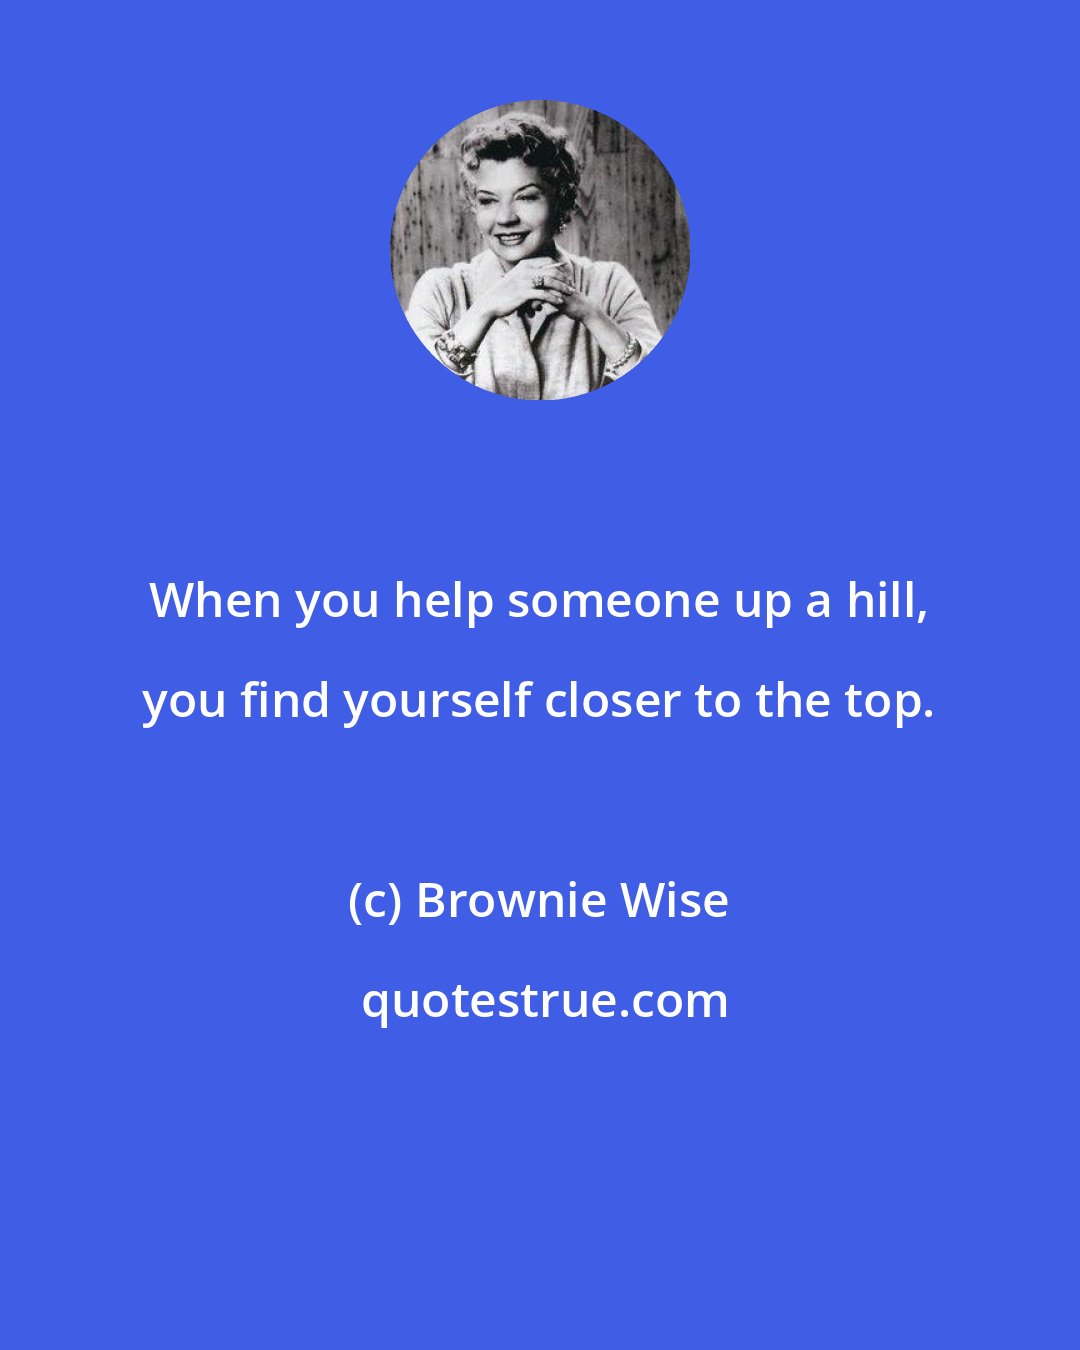 Brownie Wise: When you help someone up a hill, you find yourself closer to the top.